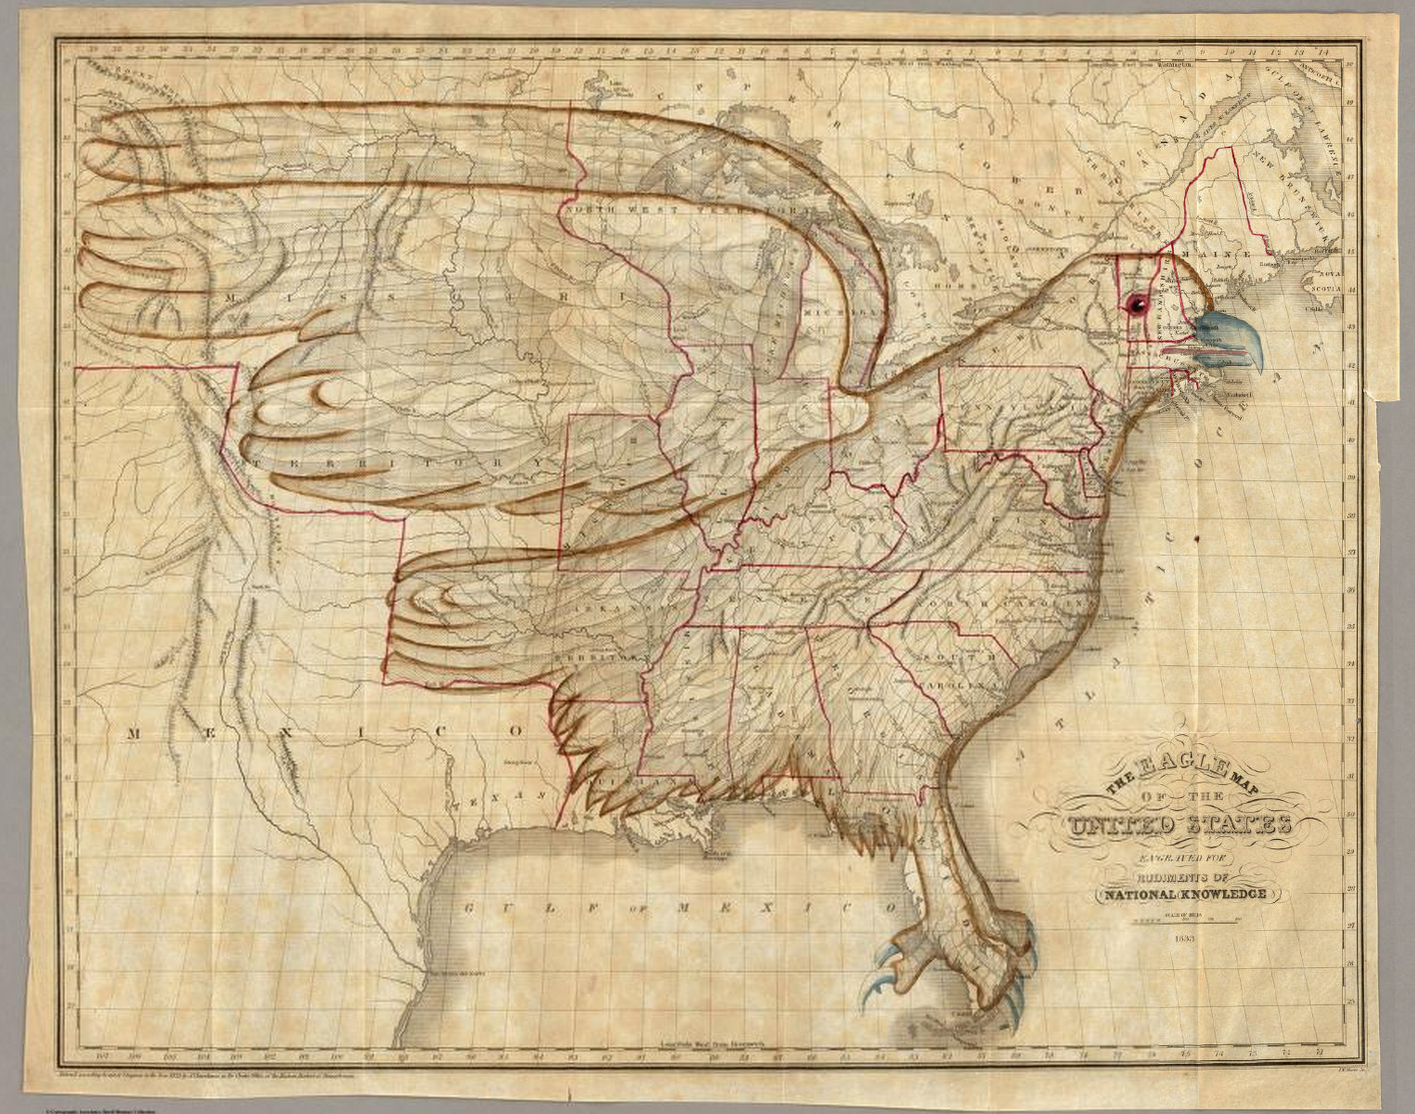 Churchman and Moore's "Eagle Map of the United States", 1833. David Rumsey Maps